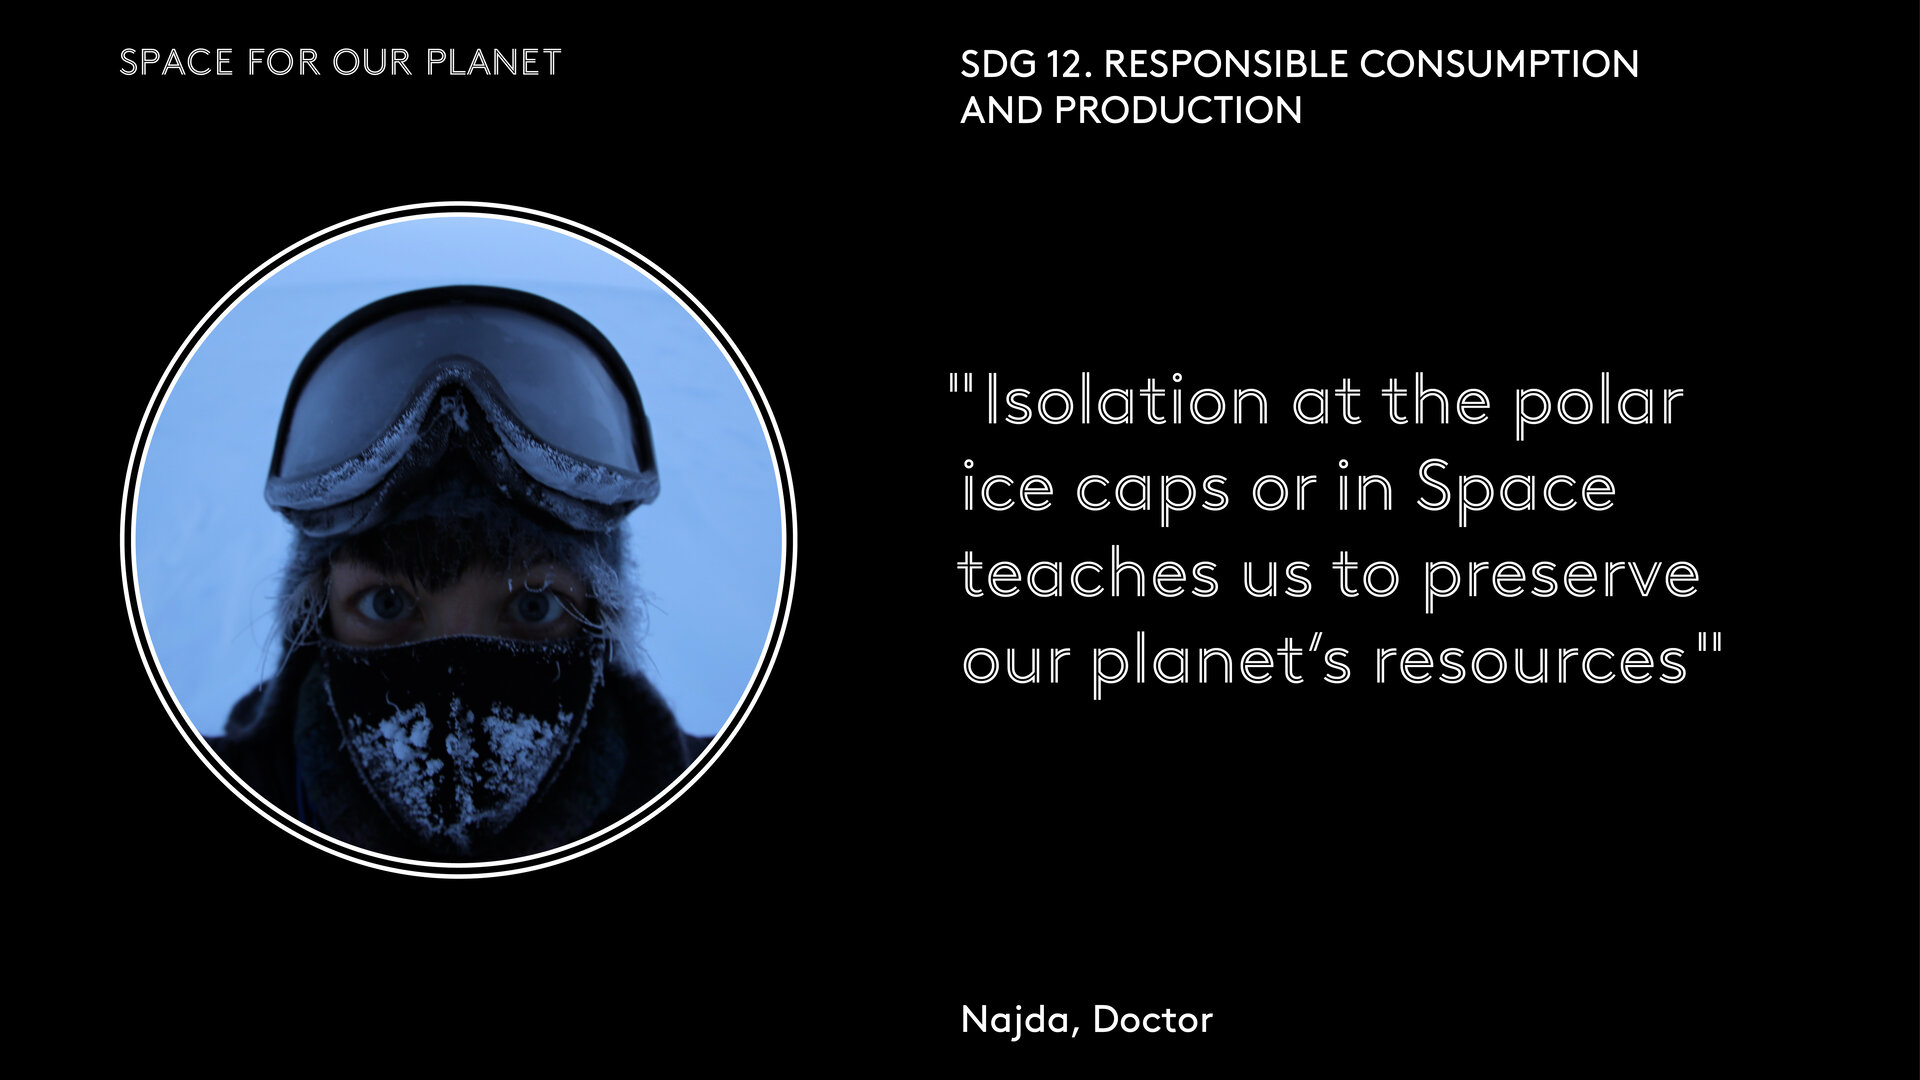 "Isolation at the polar ice caps or in space teaches us to preserve our planet's resources"